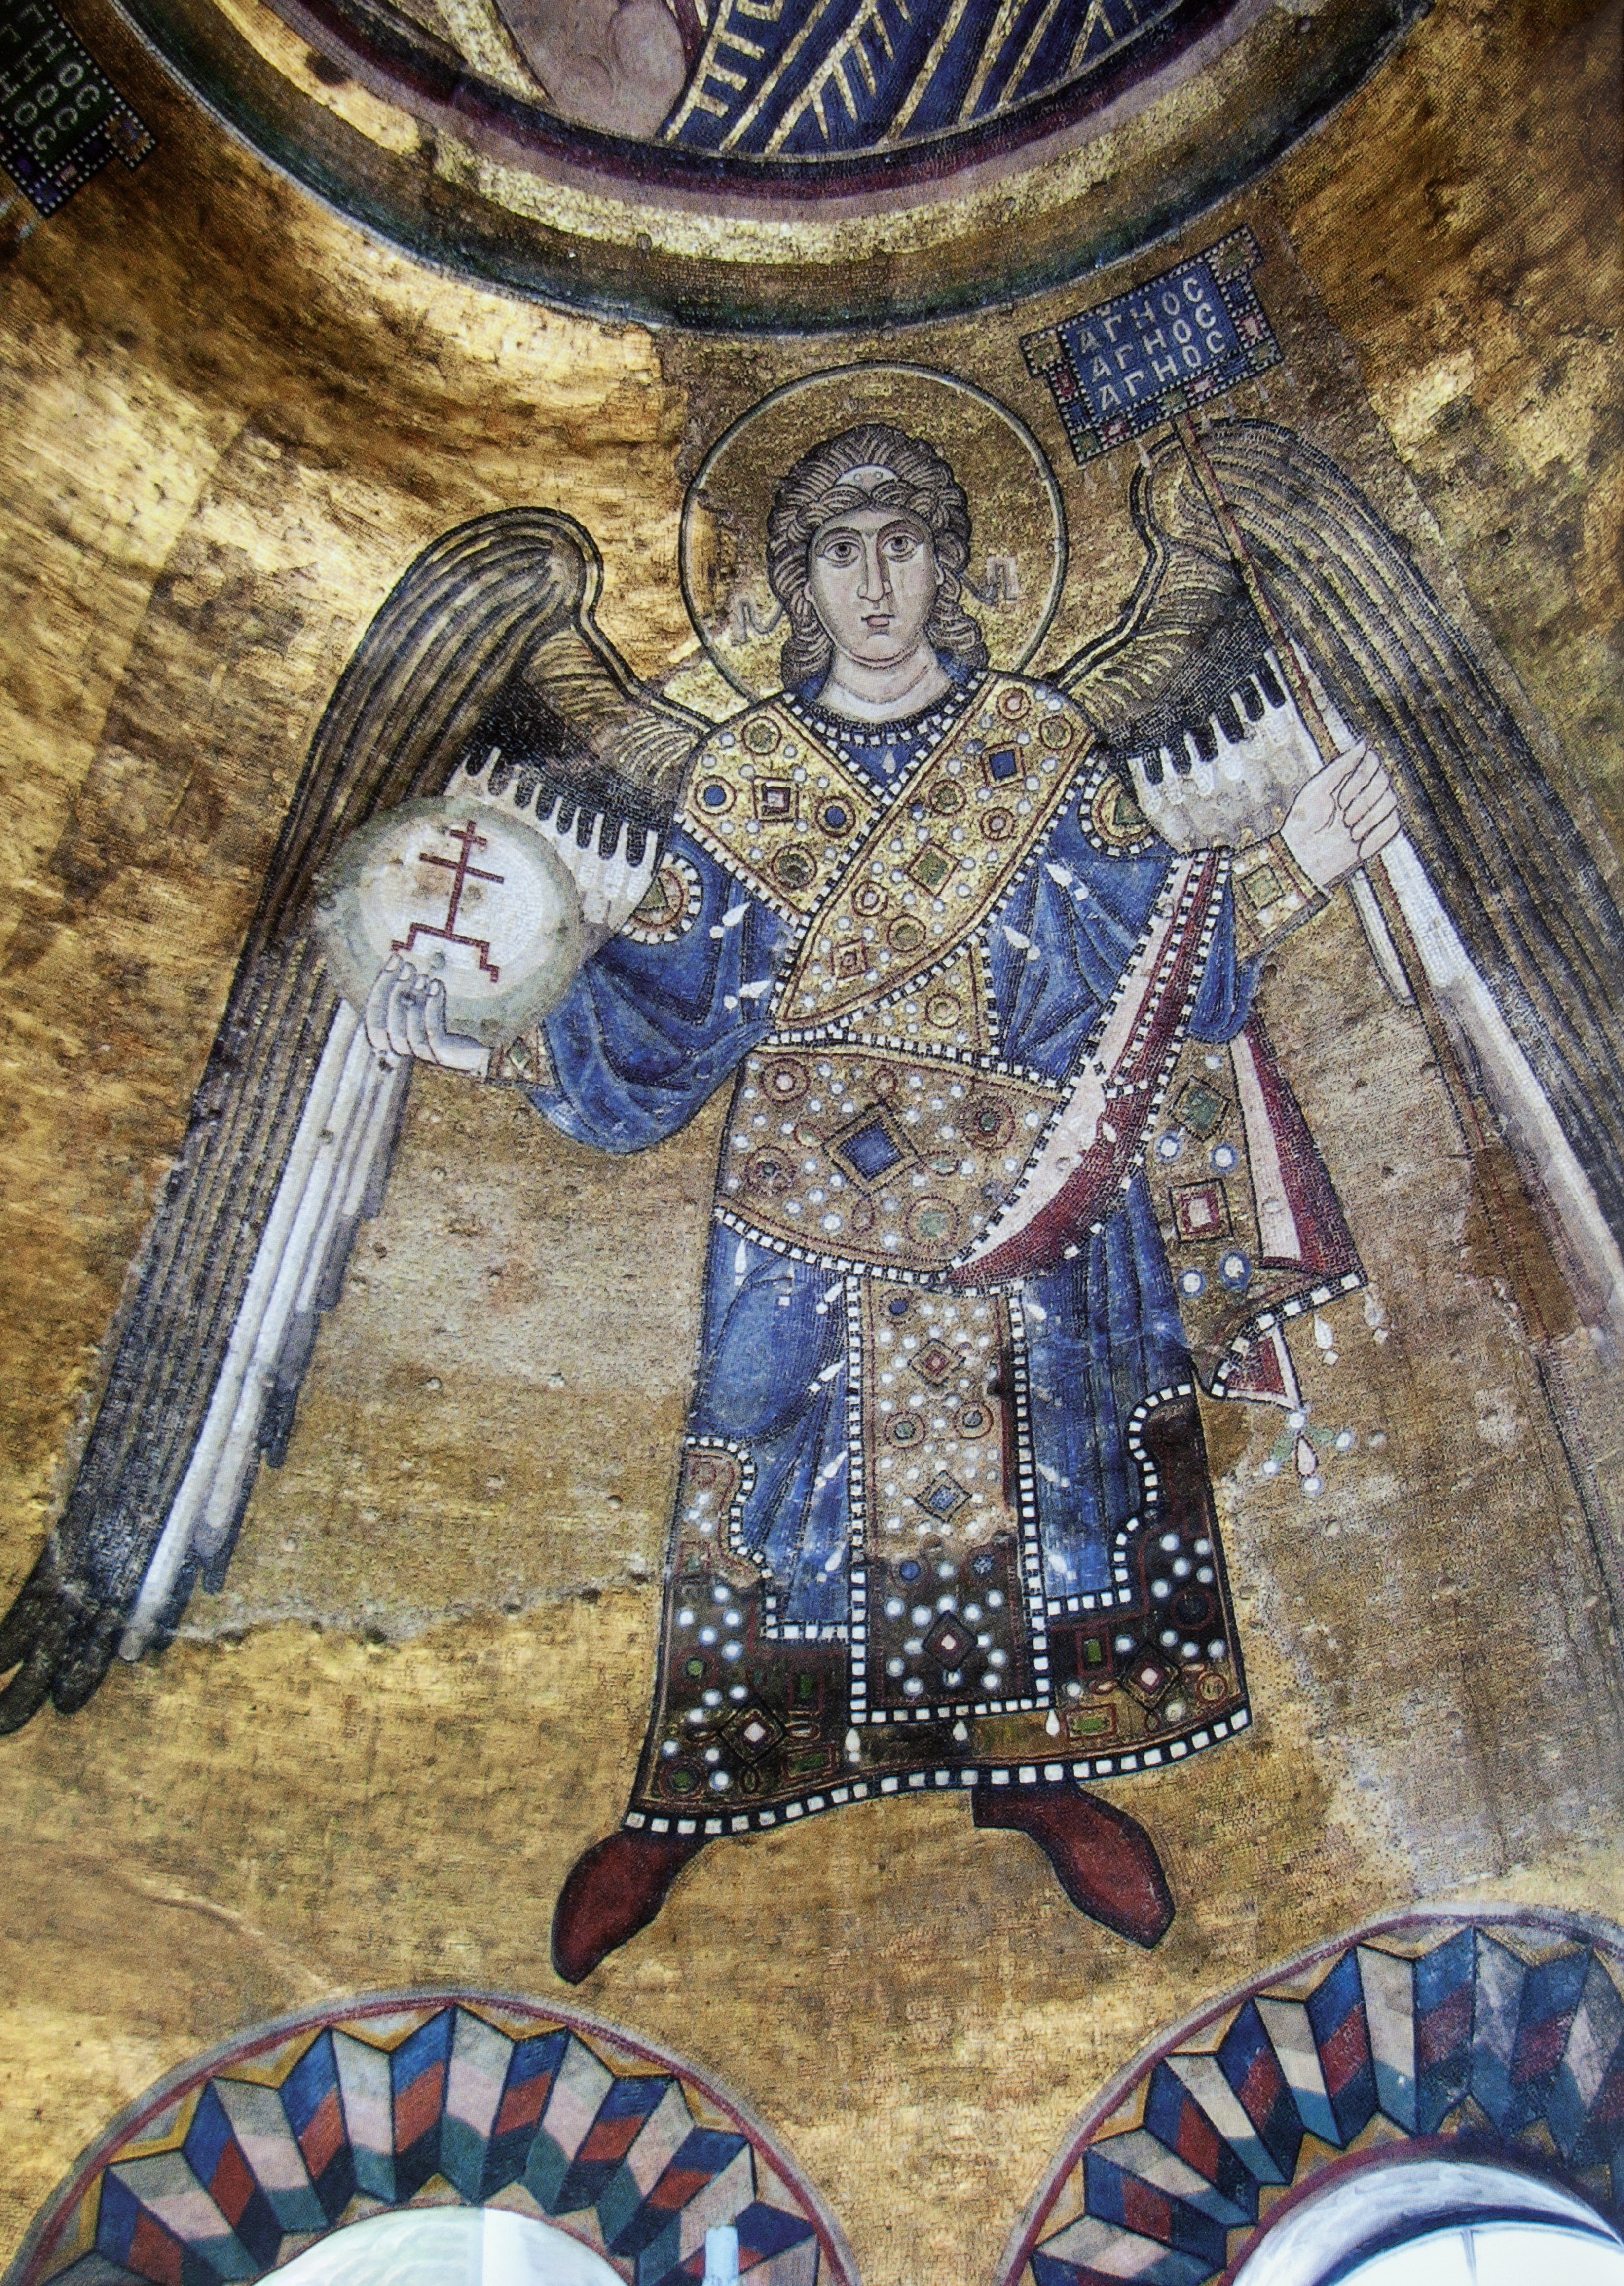 Mosaic of bust of male figure holding standard